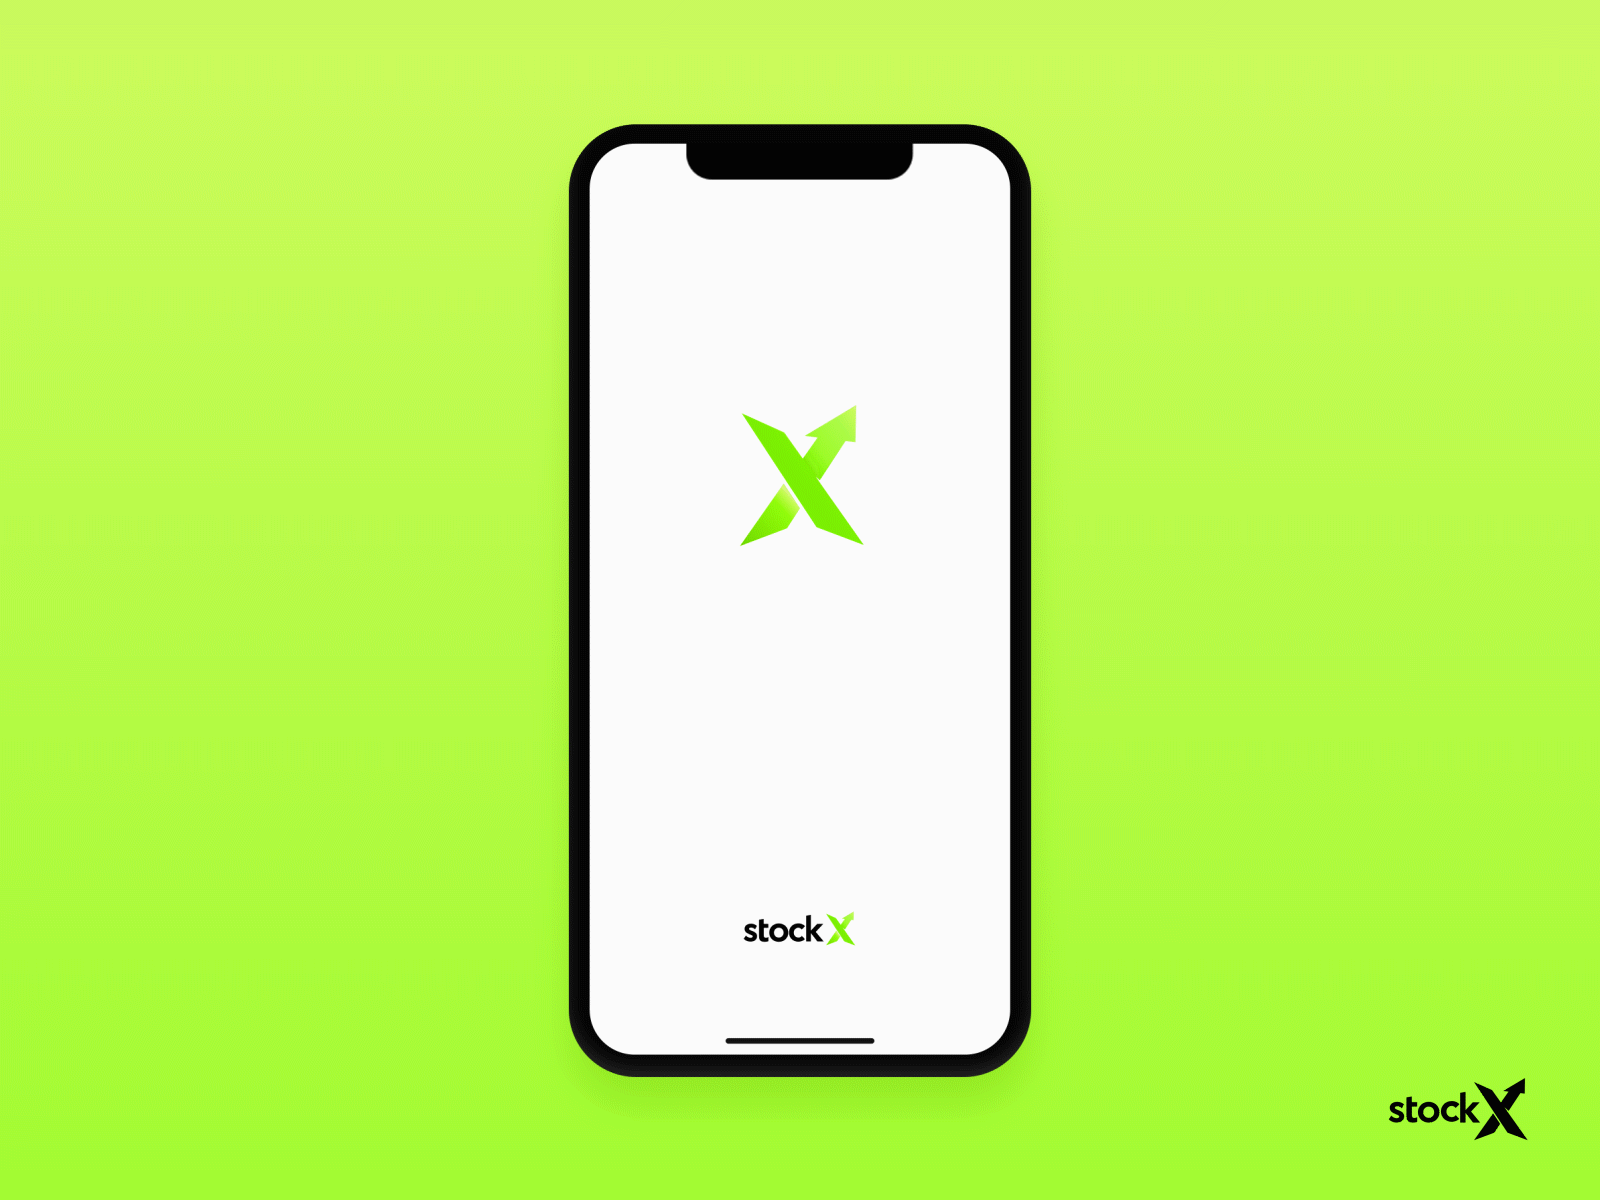 Stockx Landing Page adobe ae animation app app design branding company famous green green logo icon landing page login page logo mobile sneaker ui uidesign ux x